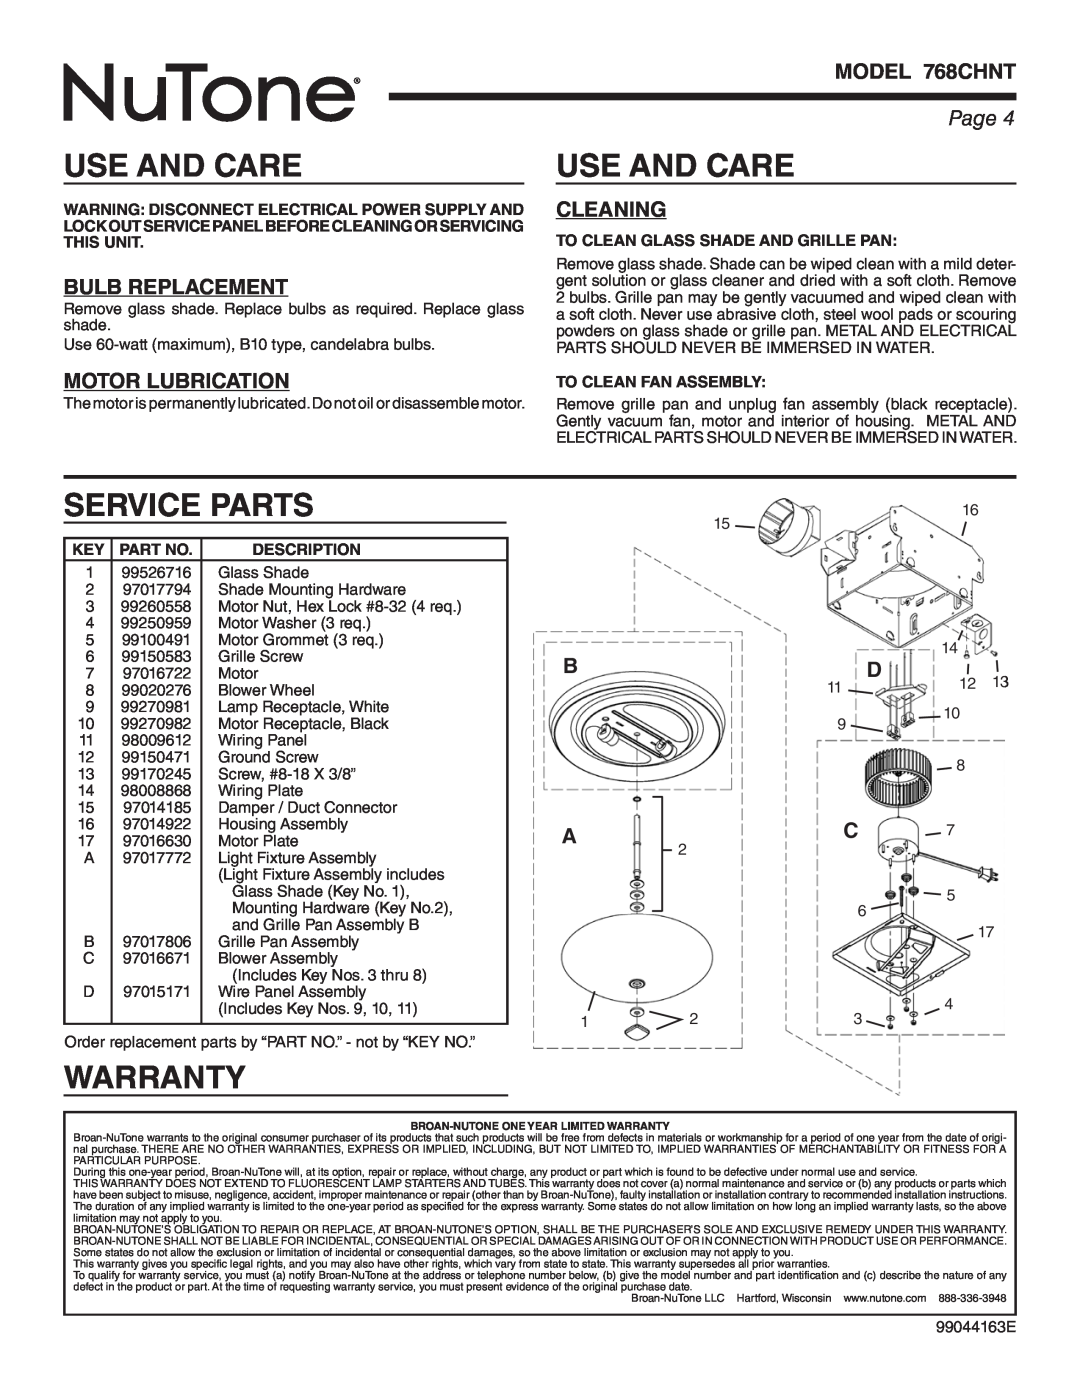 NuTone Use And Care, Service Parts, Warranty, Bulb Replacement, Motor Lubrication, Cleaning, MODEL 768CHNT, Page 